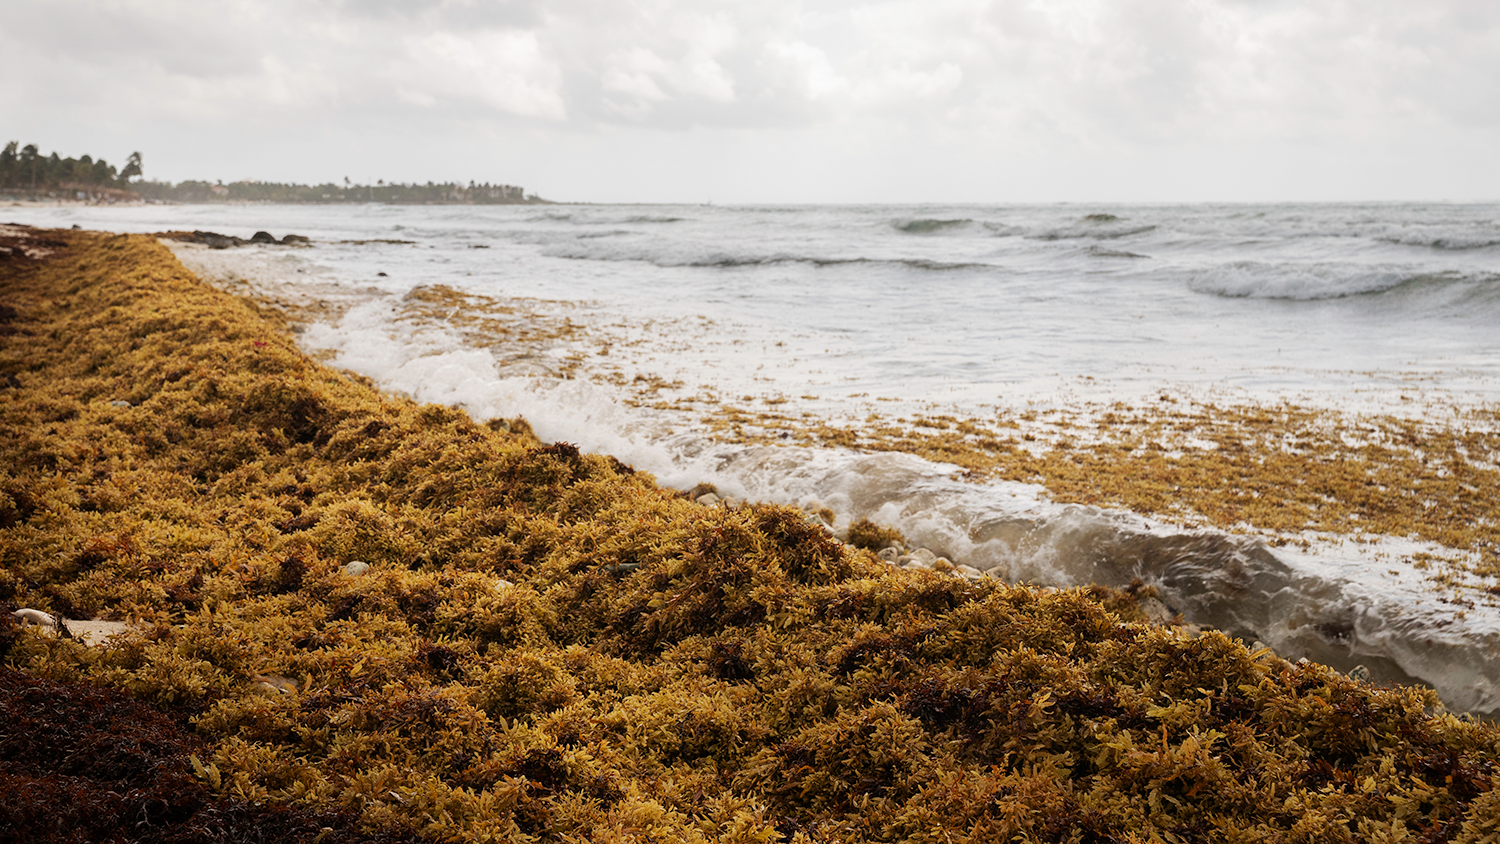 Sargassum, brown seaweed algae, on the beach, Akumal Bay, Mexico - Sargassum is a Growing Problem, Researchers May Have a Solution - College of Natural Resources News NC State University